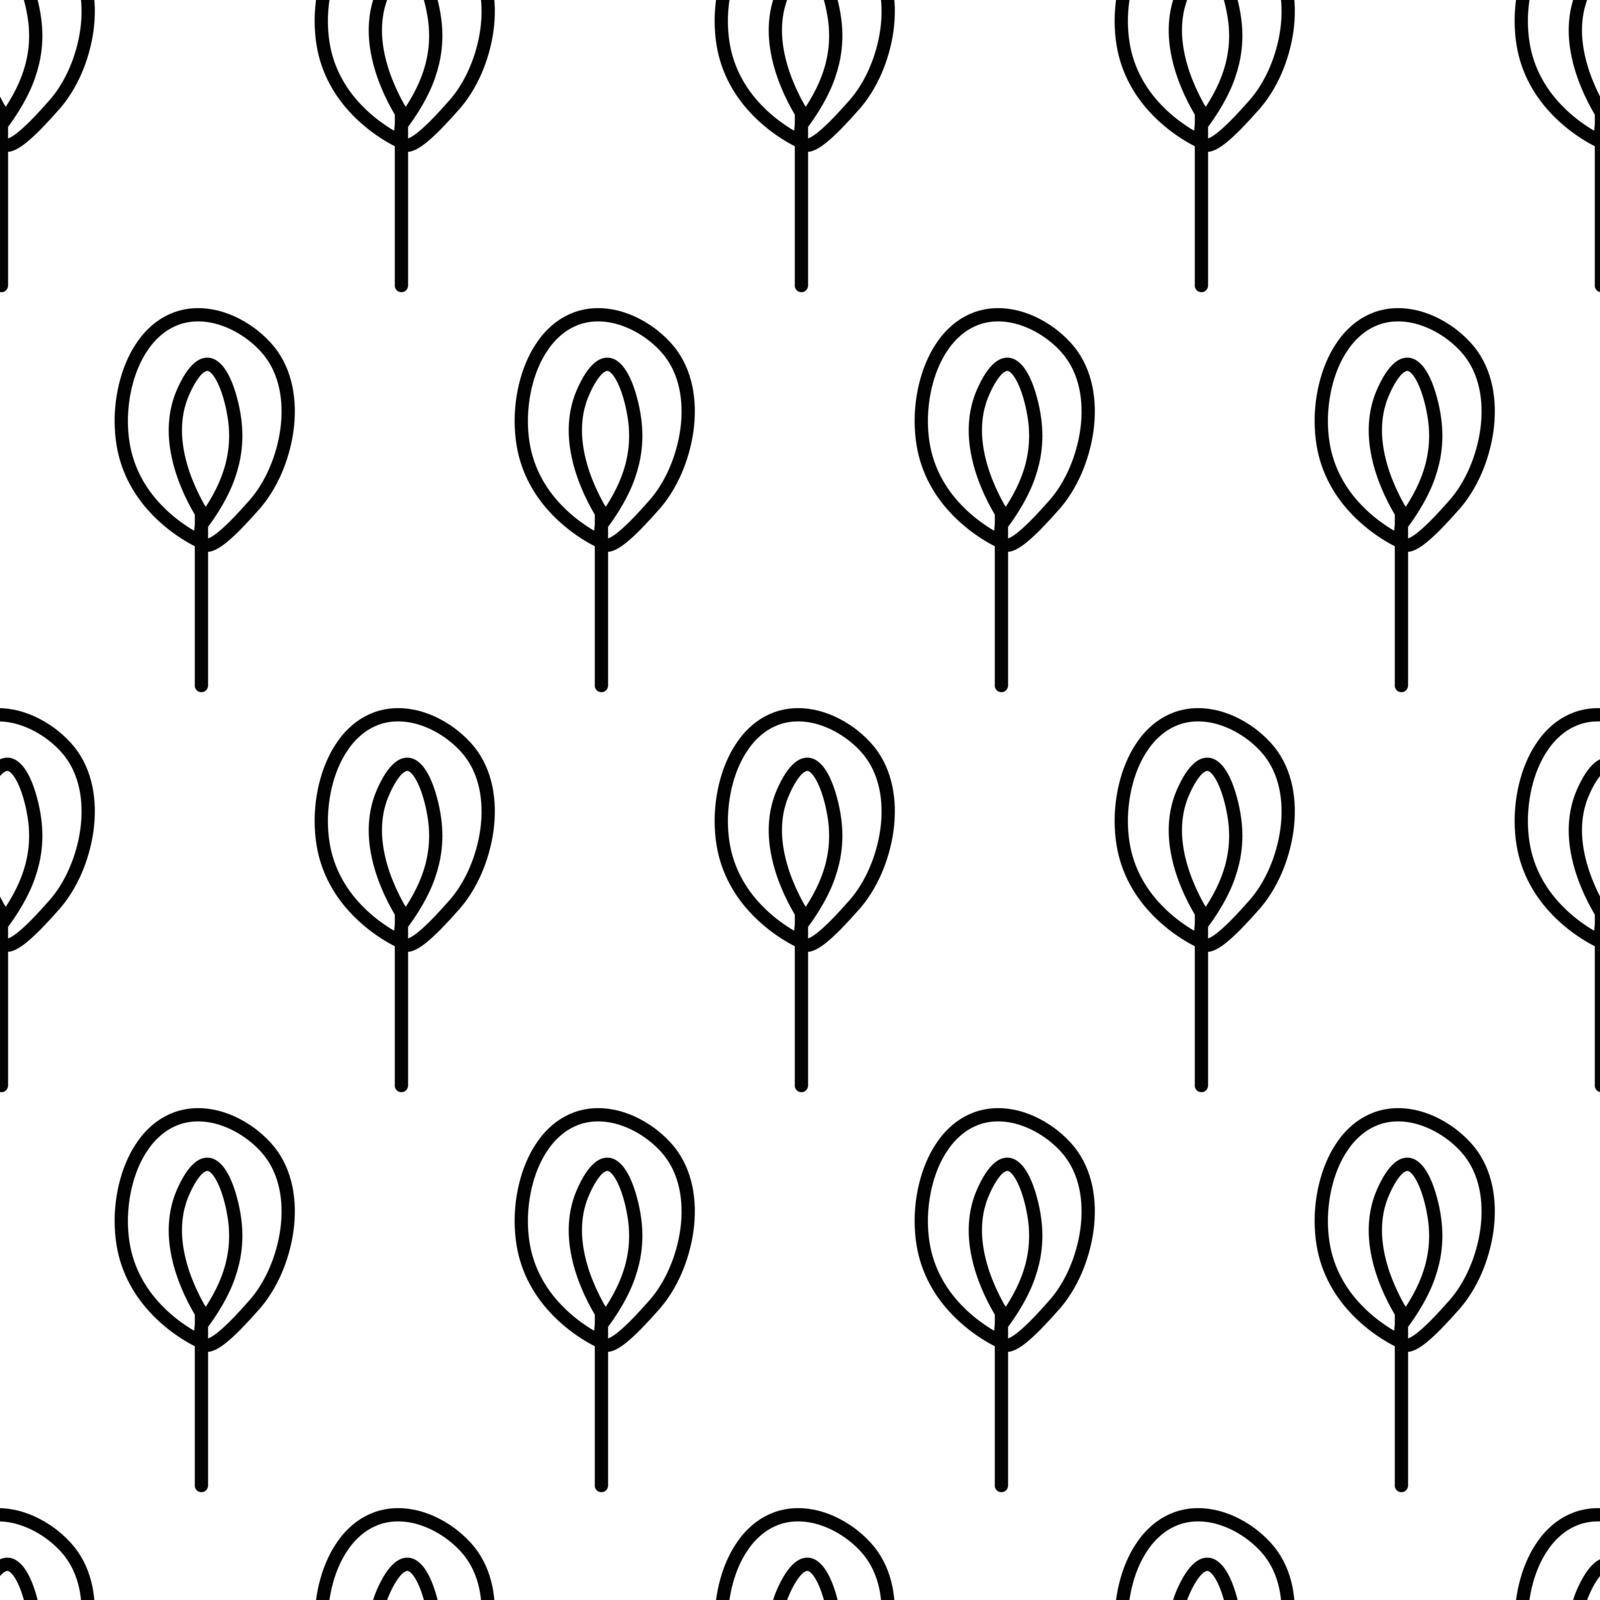 Black and white seamless pattern with tree icon. Vector trees symbol sign. Plants, landscape design for print, card, postcard, fabric, textile. Business idea concept by allaku